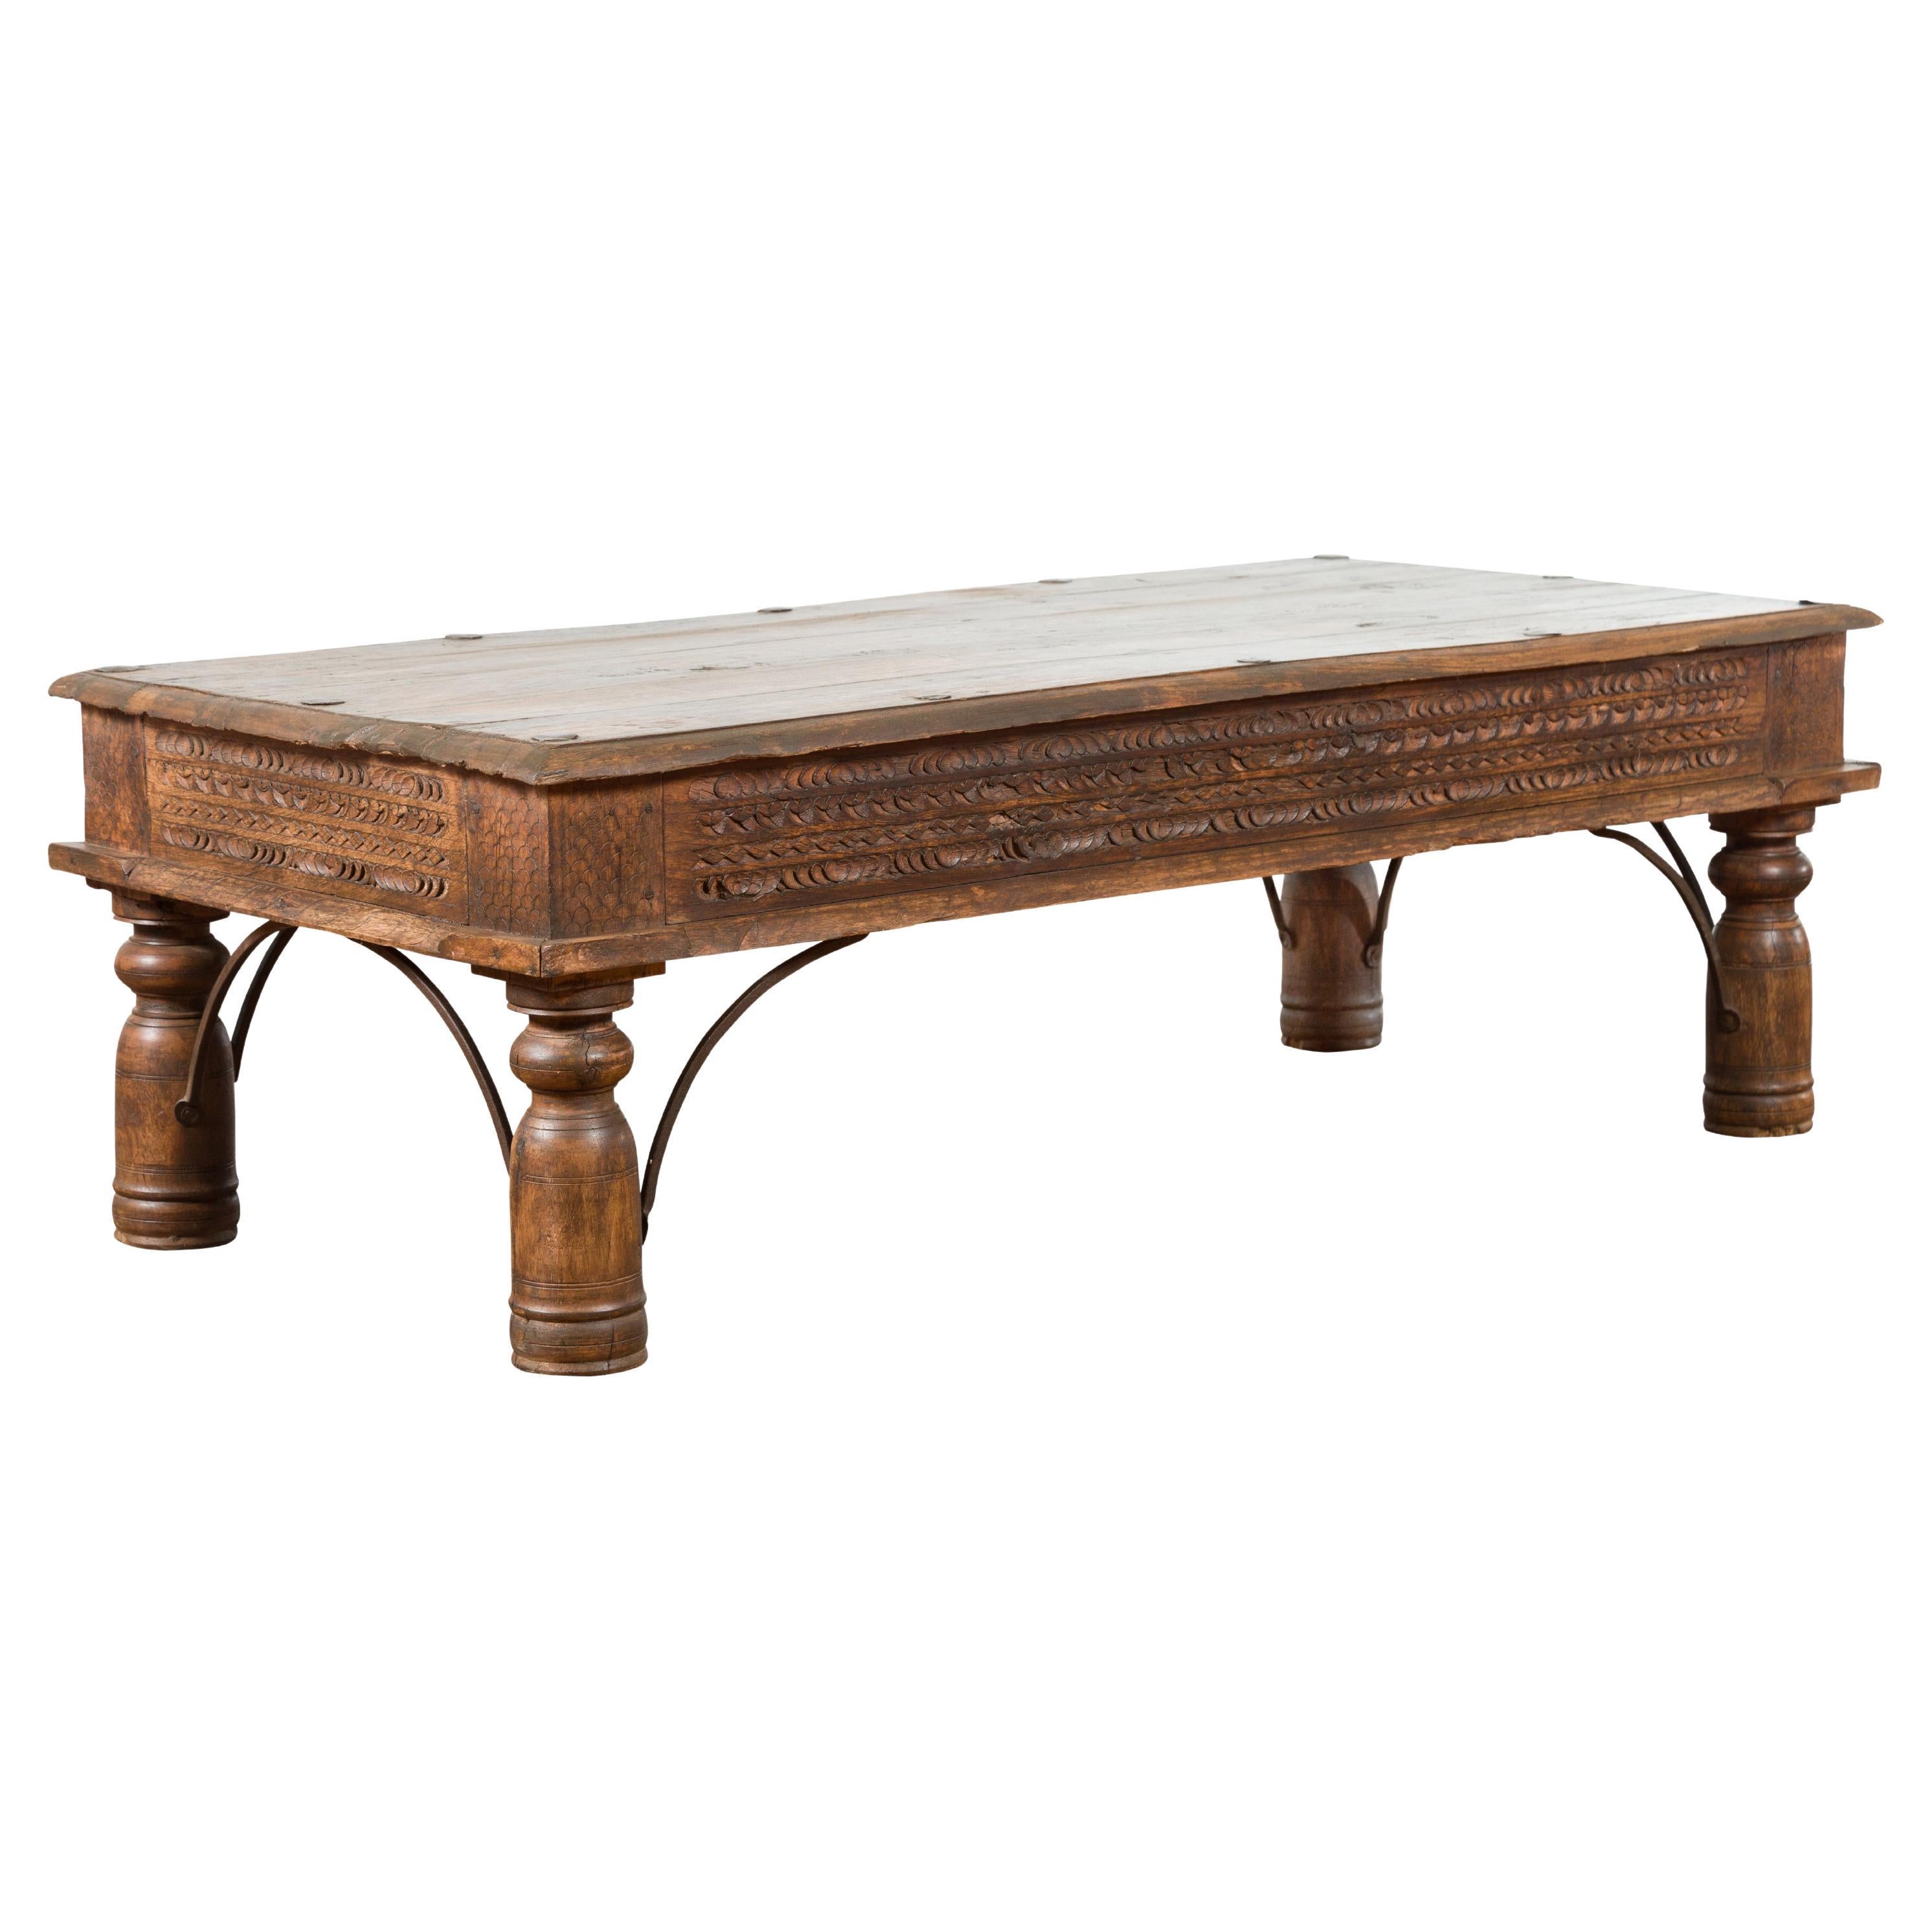 19th Century Indian Rustic Coffee Table with Carved Apron and Iron Accents